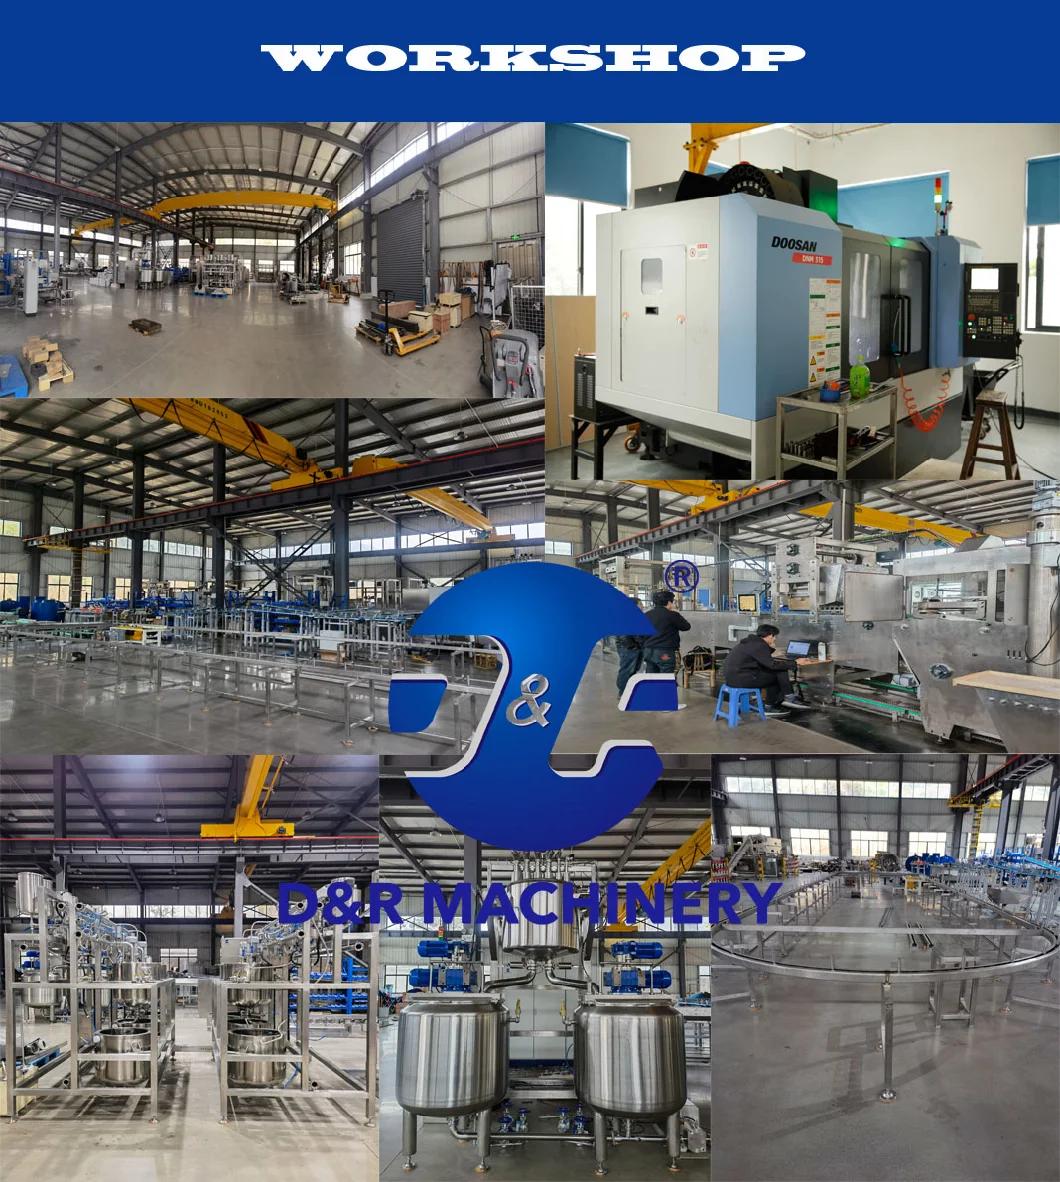 Stainless Steel Adjustable Automatic Chocolate Glaze Coating Machine for Chocolate Bean/Melon/Nuts/Dry Fruit